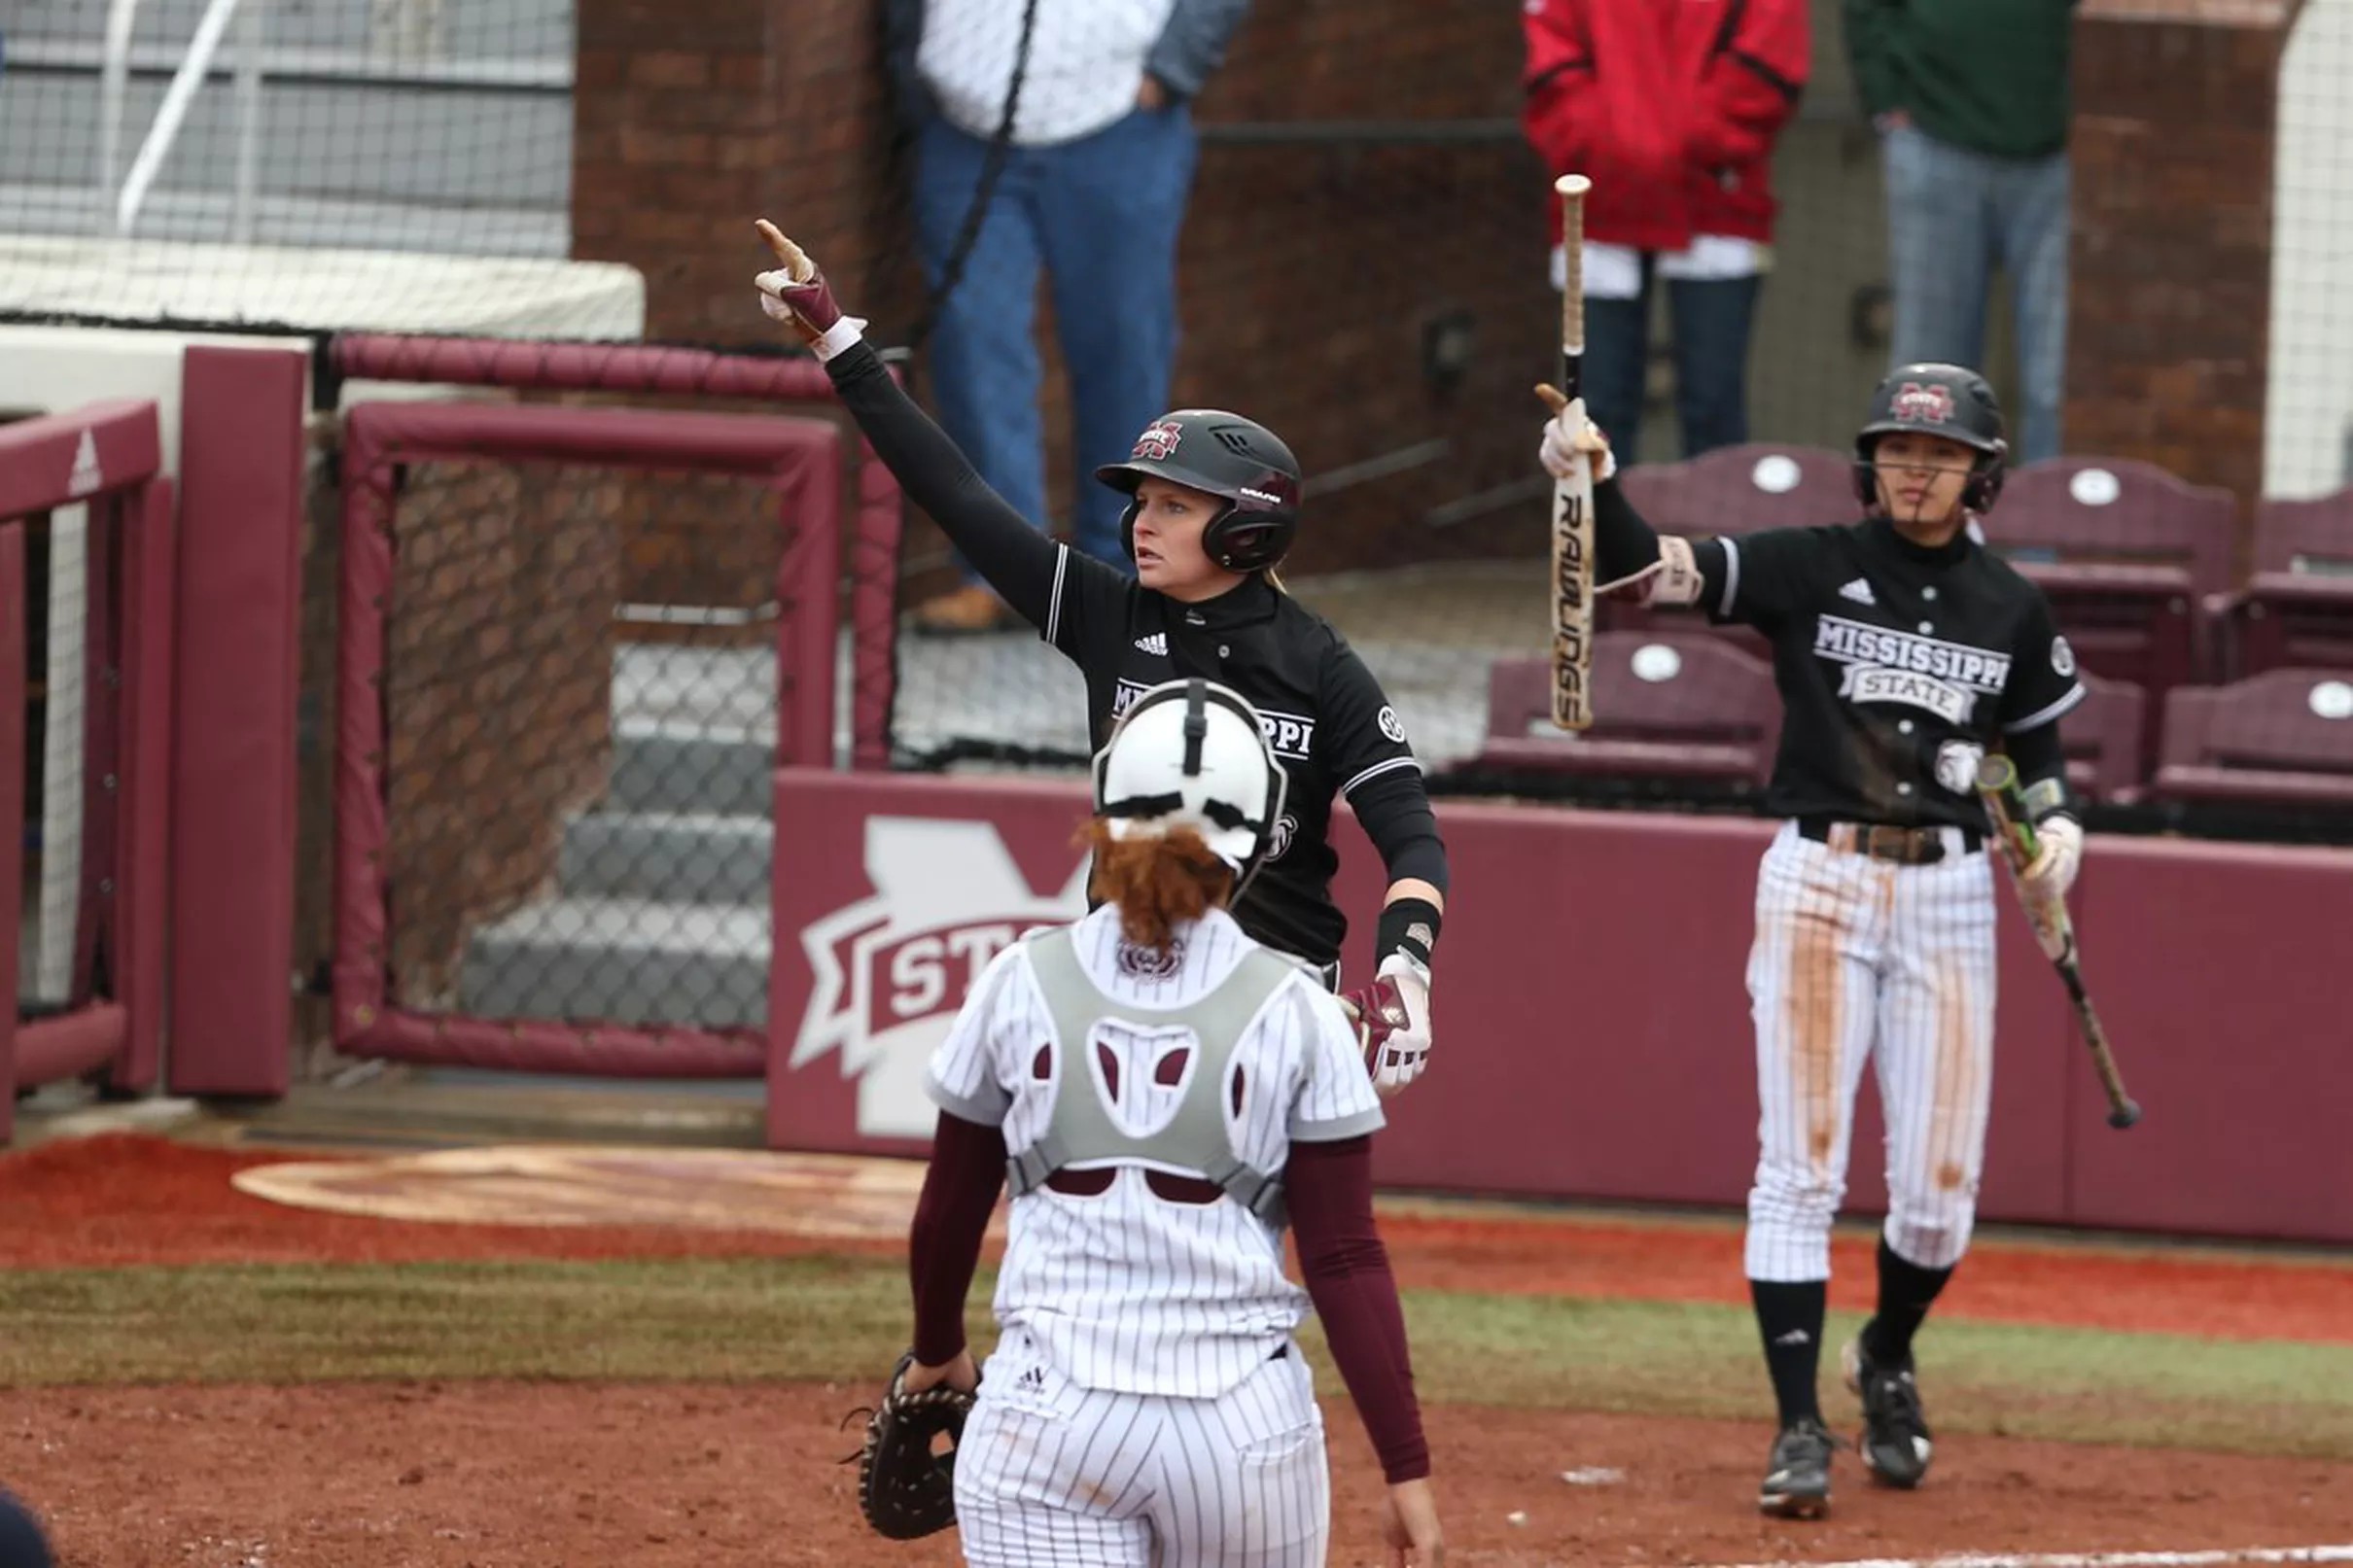 The Mississippi State softball team split yesterday’s double header out